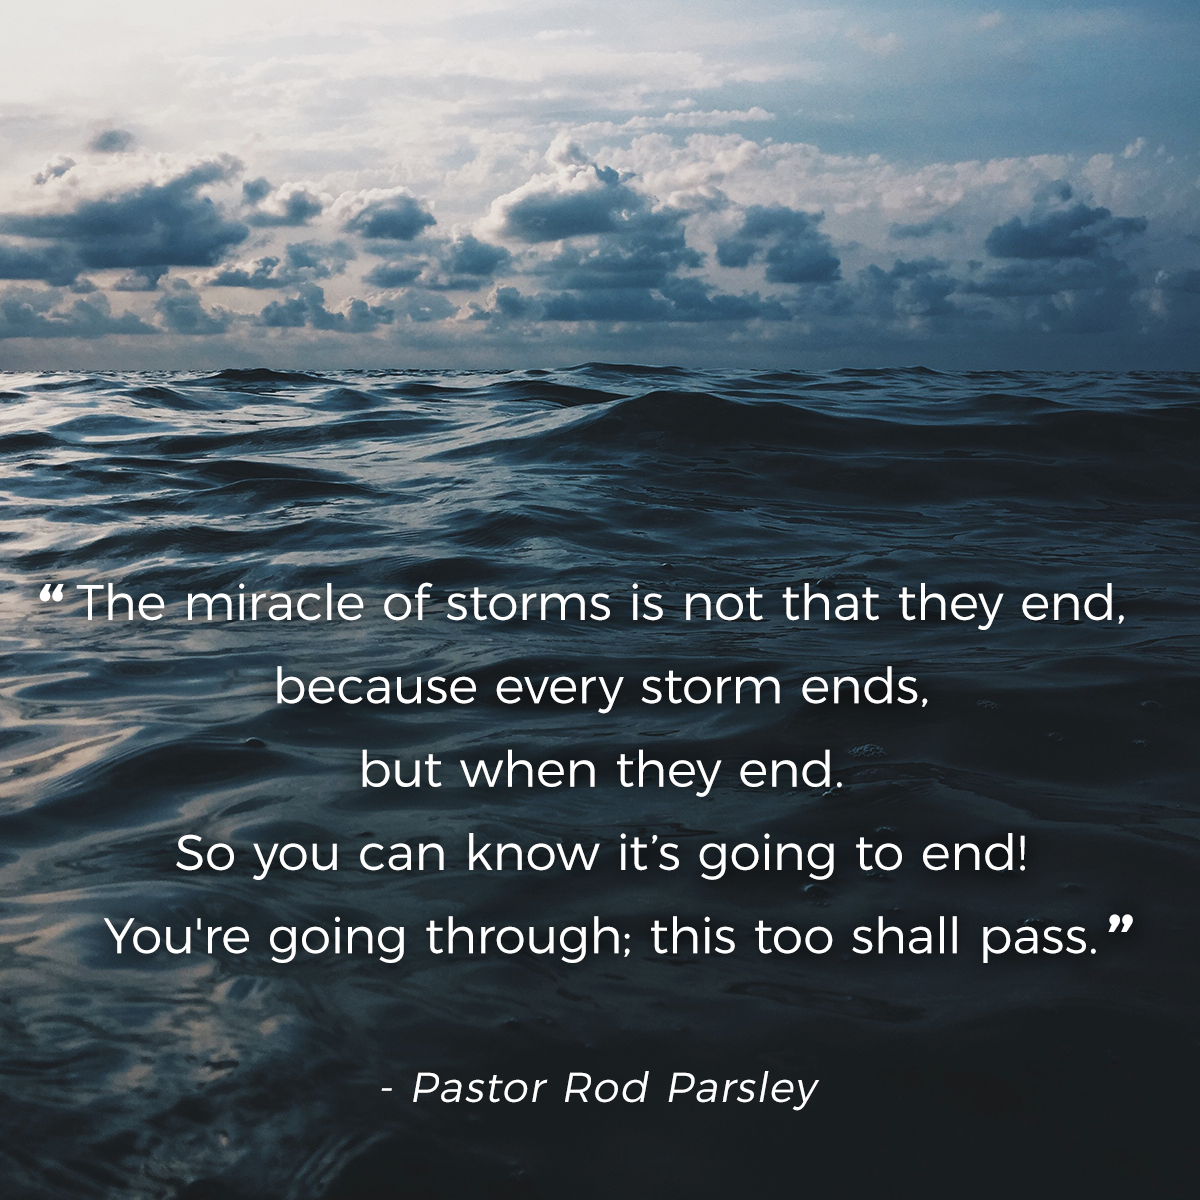 “The miracle of storms is not that they end, because every storm ends, but when they end. So you can know it’s going to end! You’re going through; this too shall pass.” – Pastor Rod Parsley